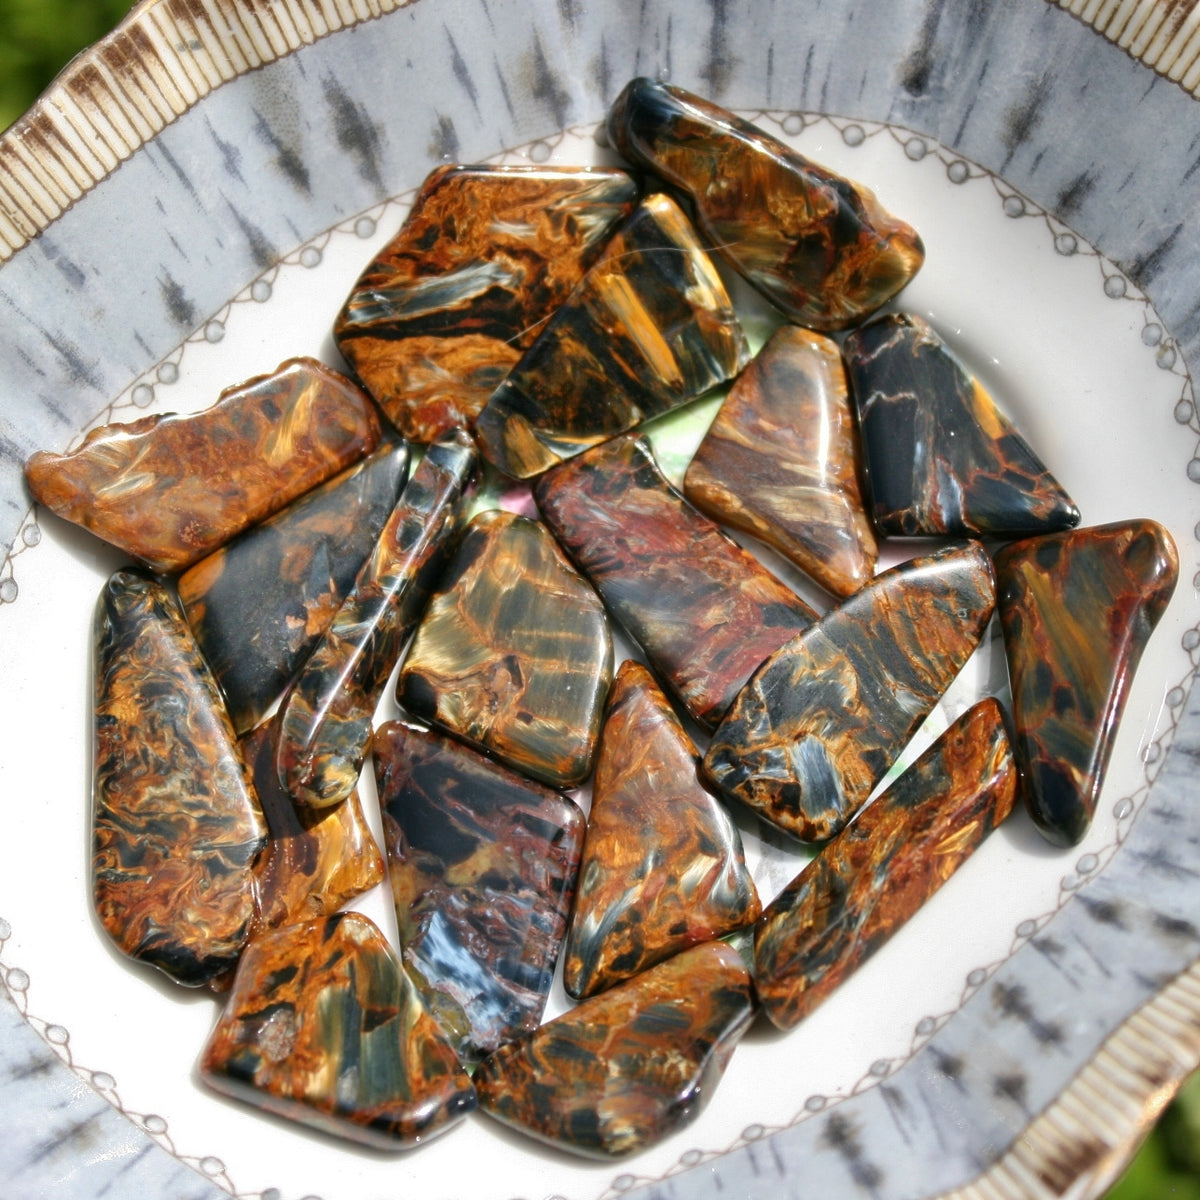 ONE Pietersite Chatoyant Tumbled Stones from Namibia, 2.5 - 3.5 grams each